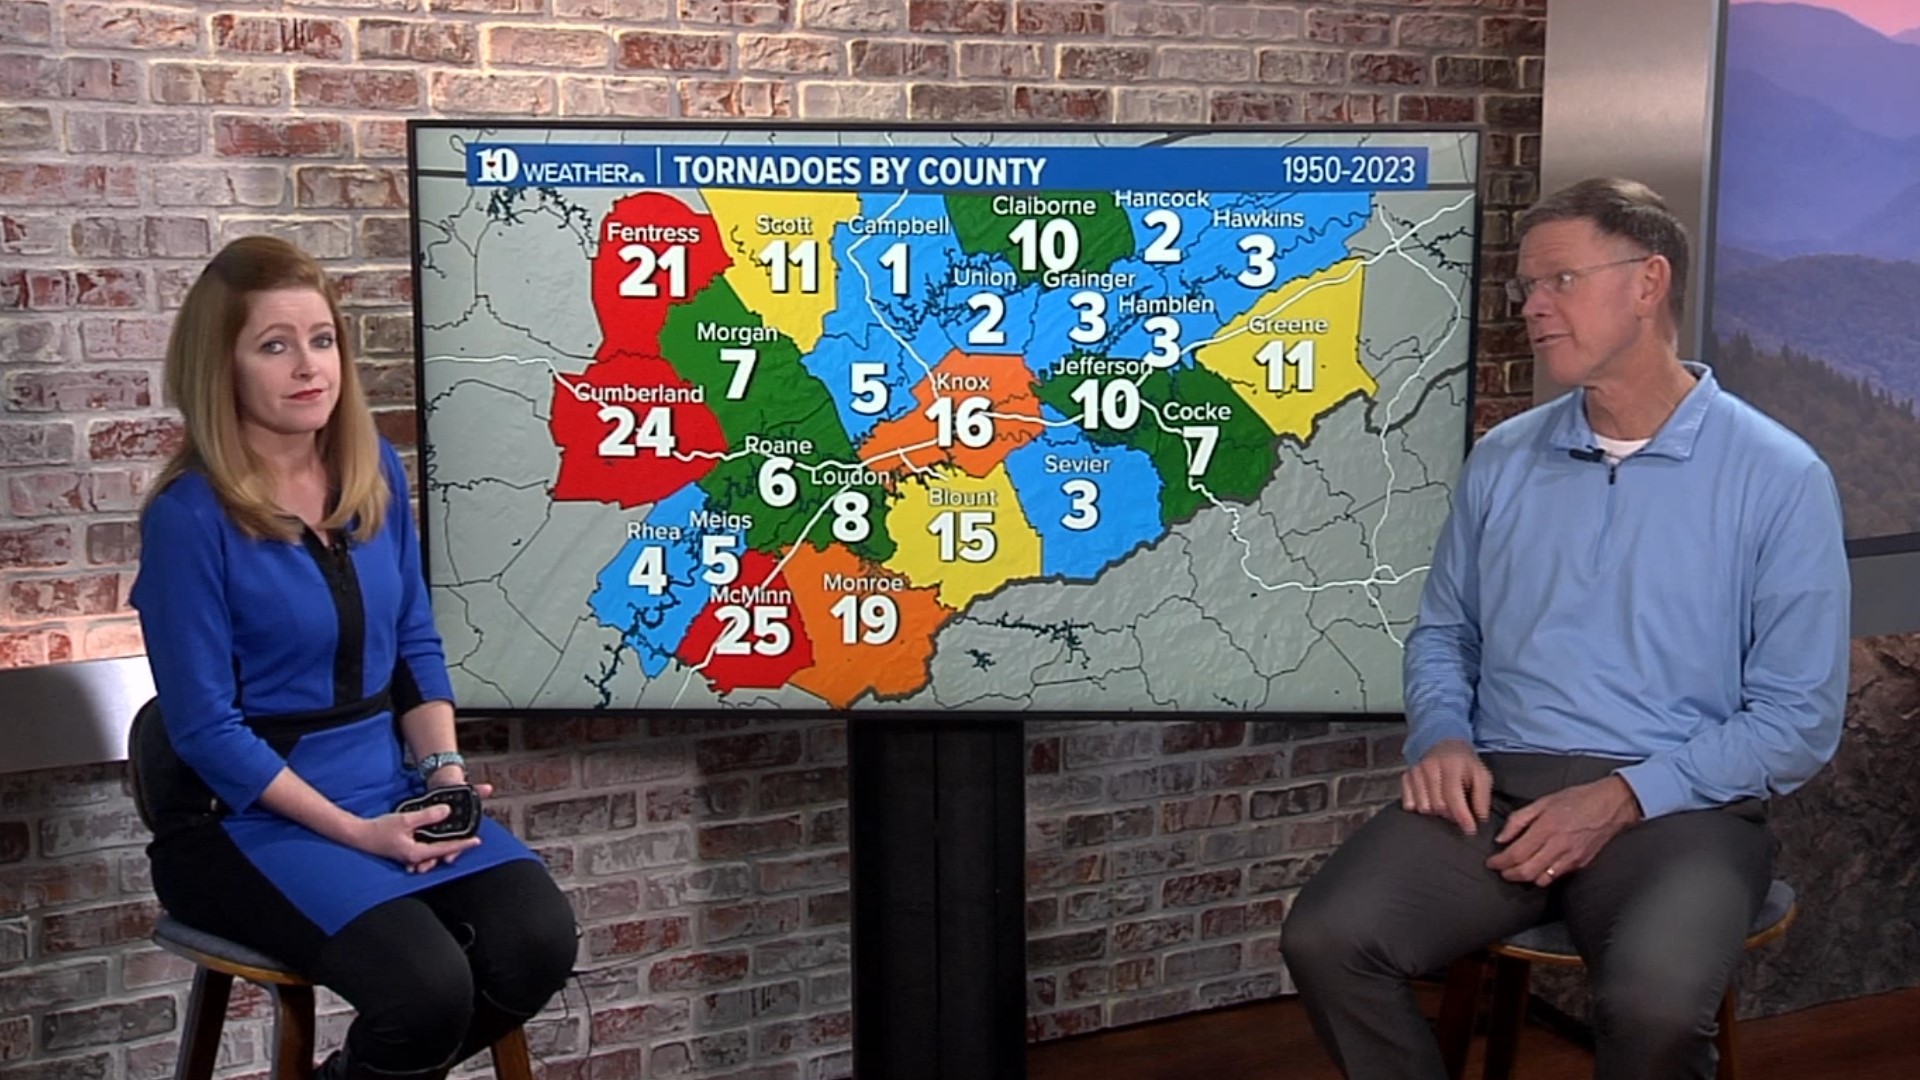 Todd and Cassie go over tips to prepare for the upcoming active storm season.